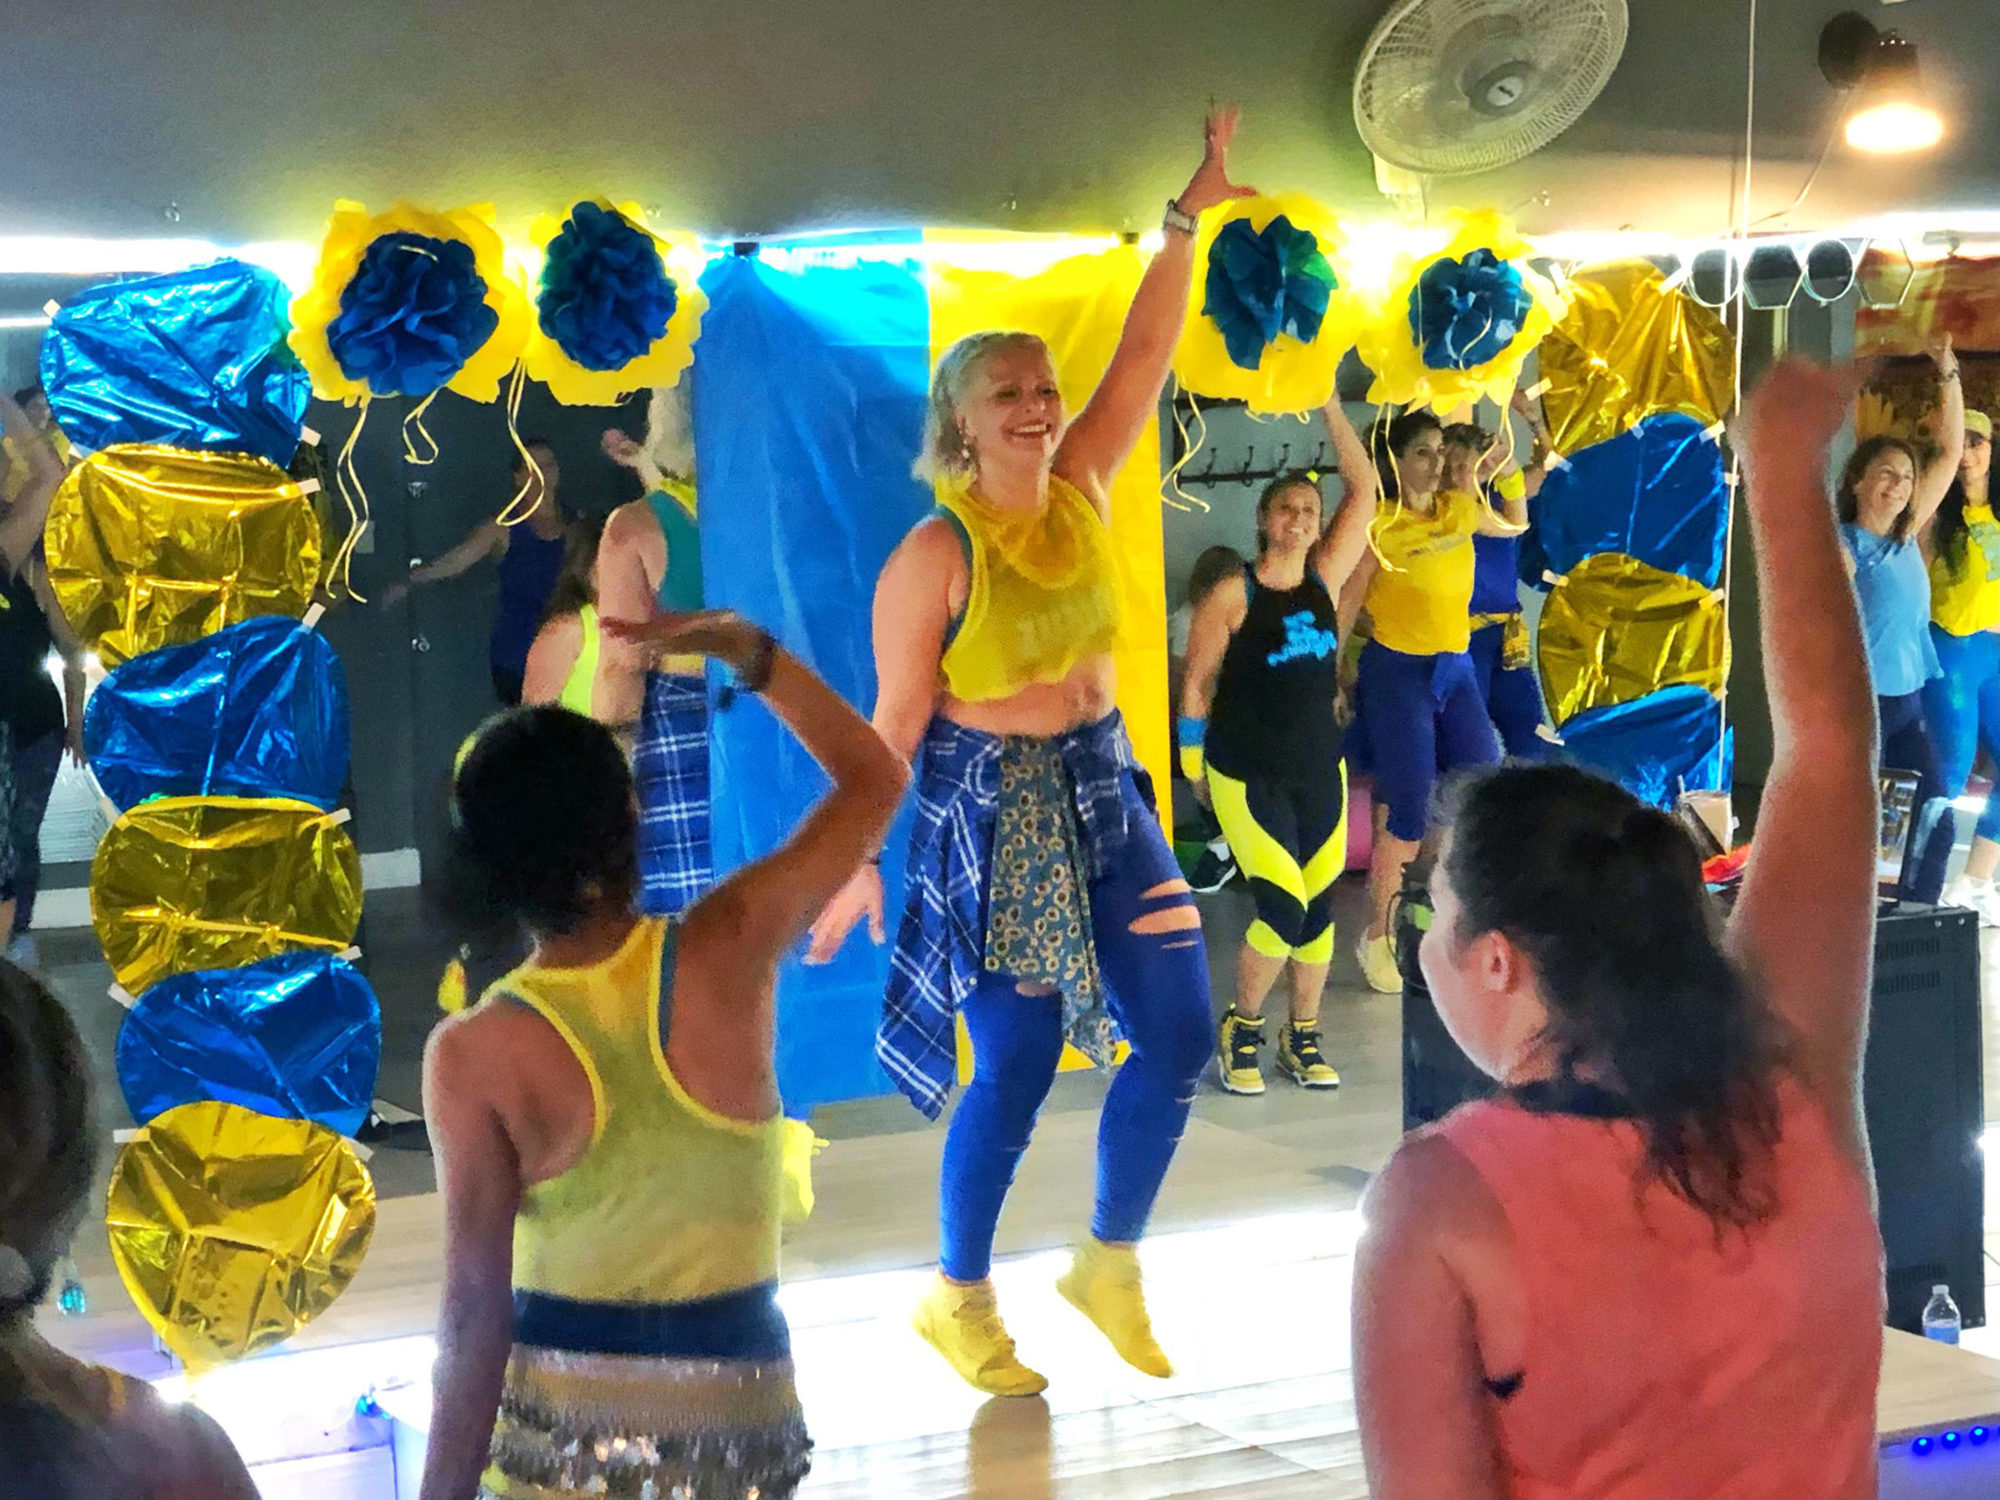 Central Park's Dasha Schultz leads a Zumba class as a fundraiser for refugees in Ukraine. Courtesy photo.